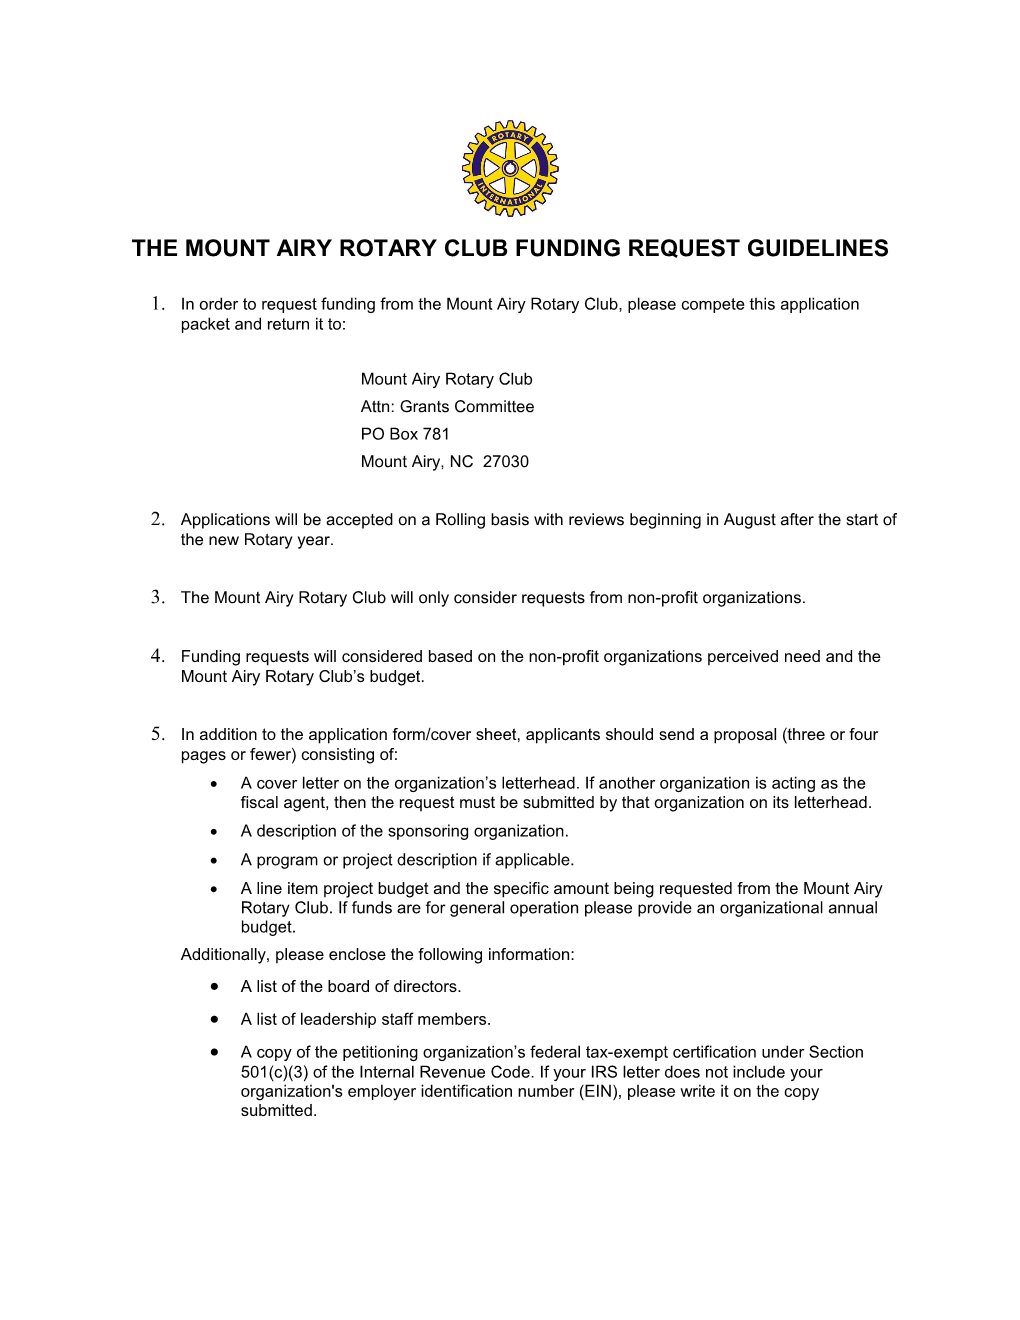 The Mount Airy Rotary Club Funding Request Guidelines